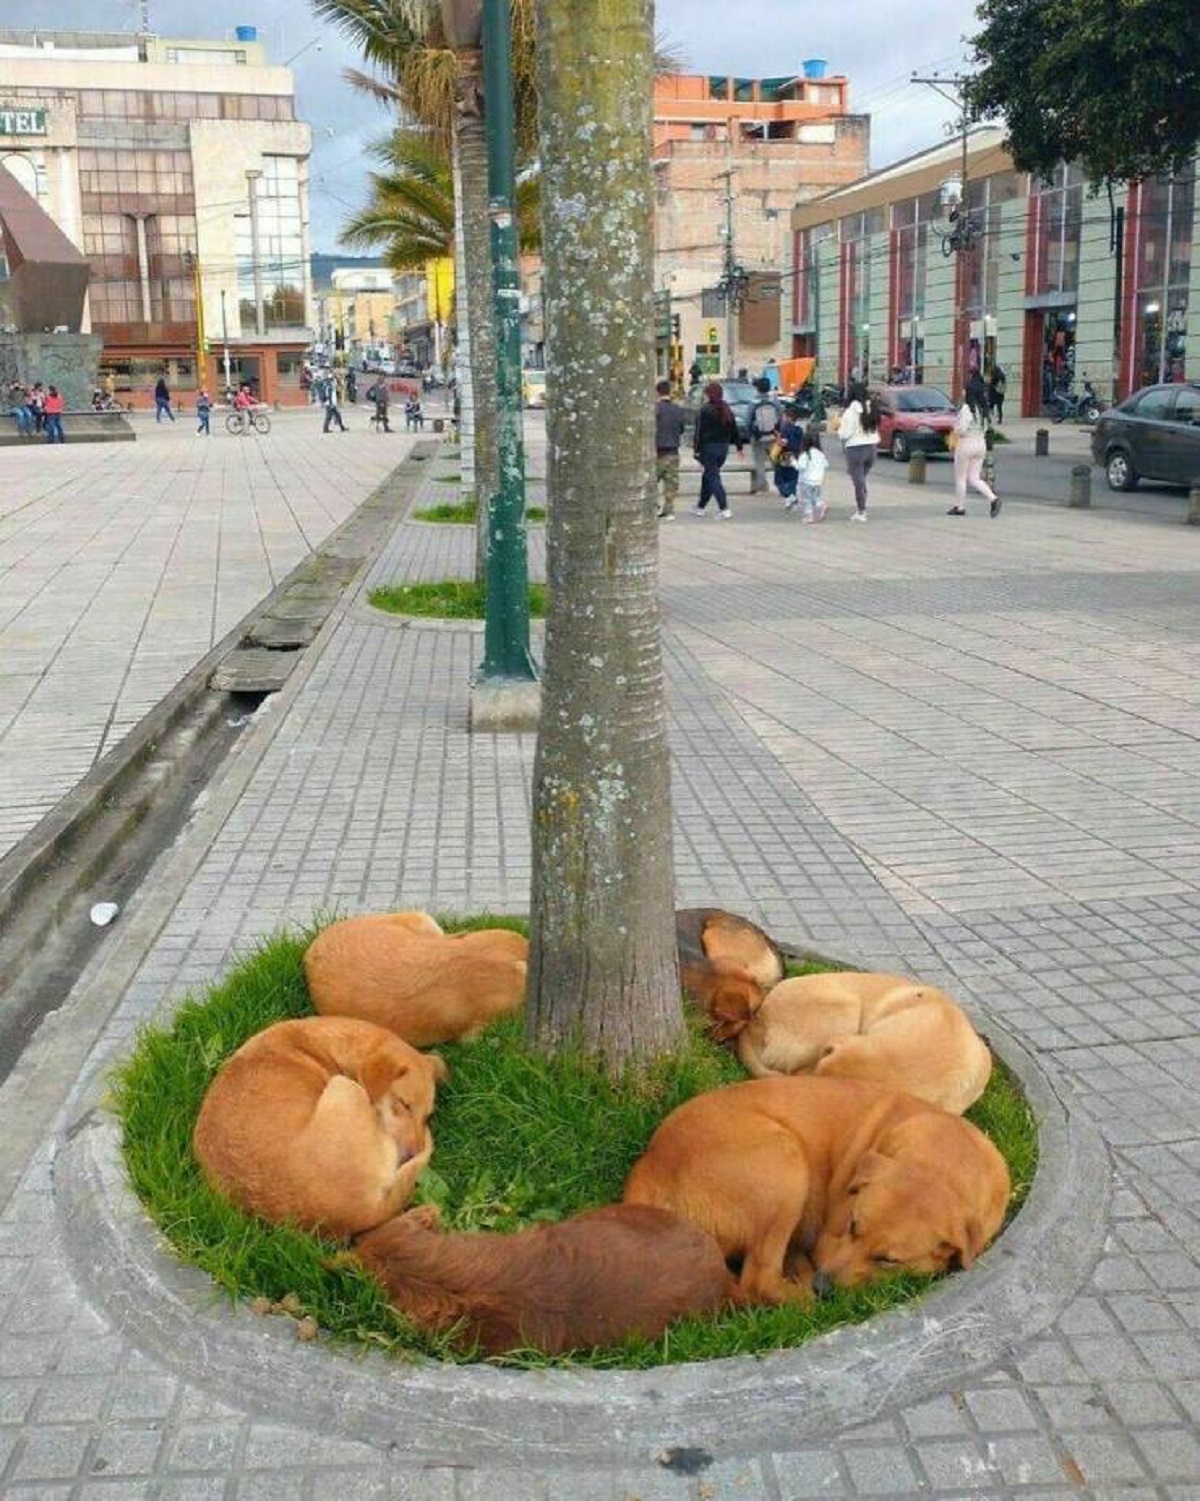 "These Stray Dogs In Brazil Surround This Tree And Rest Up Together"